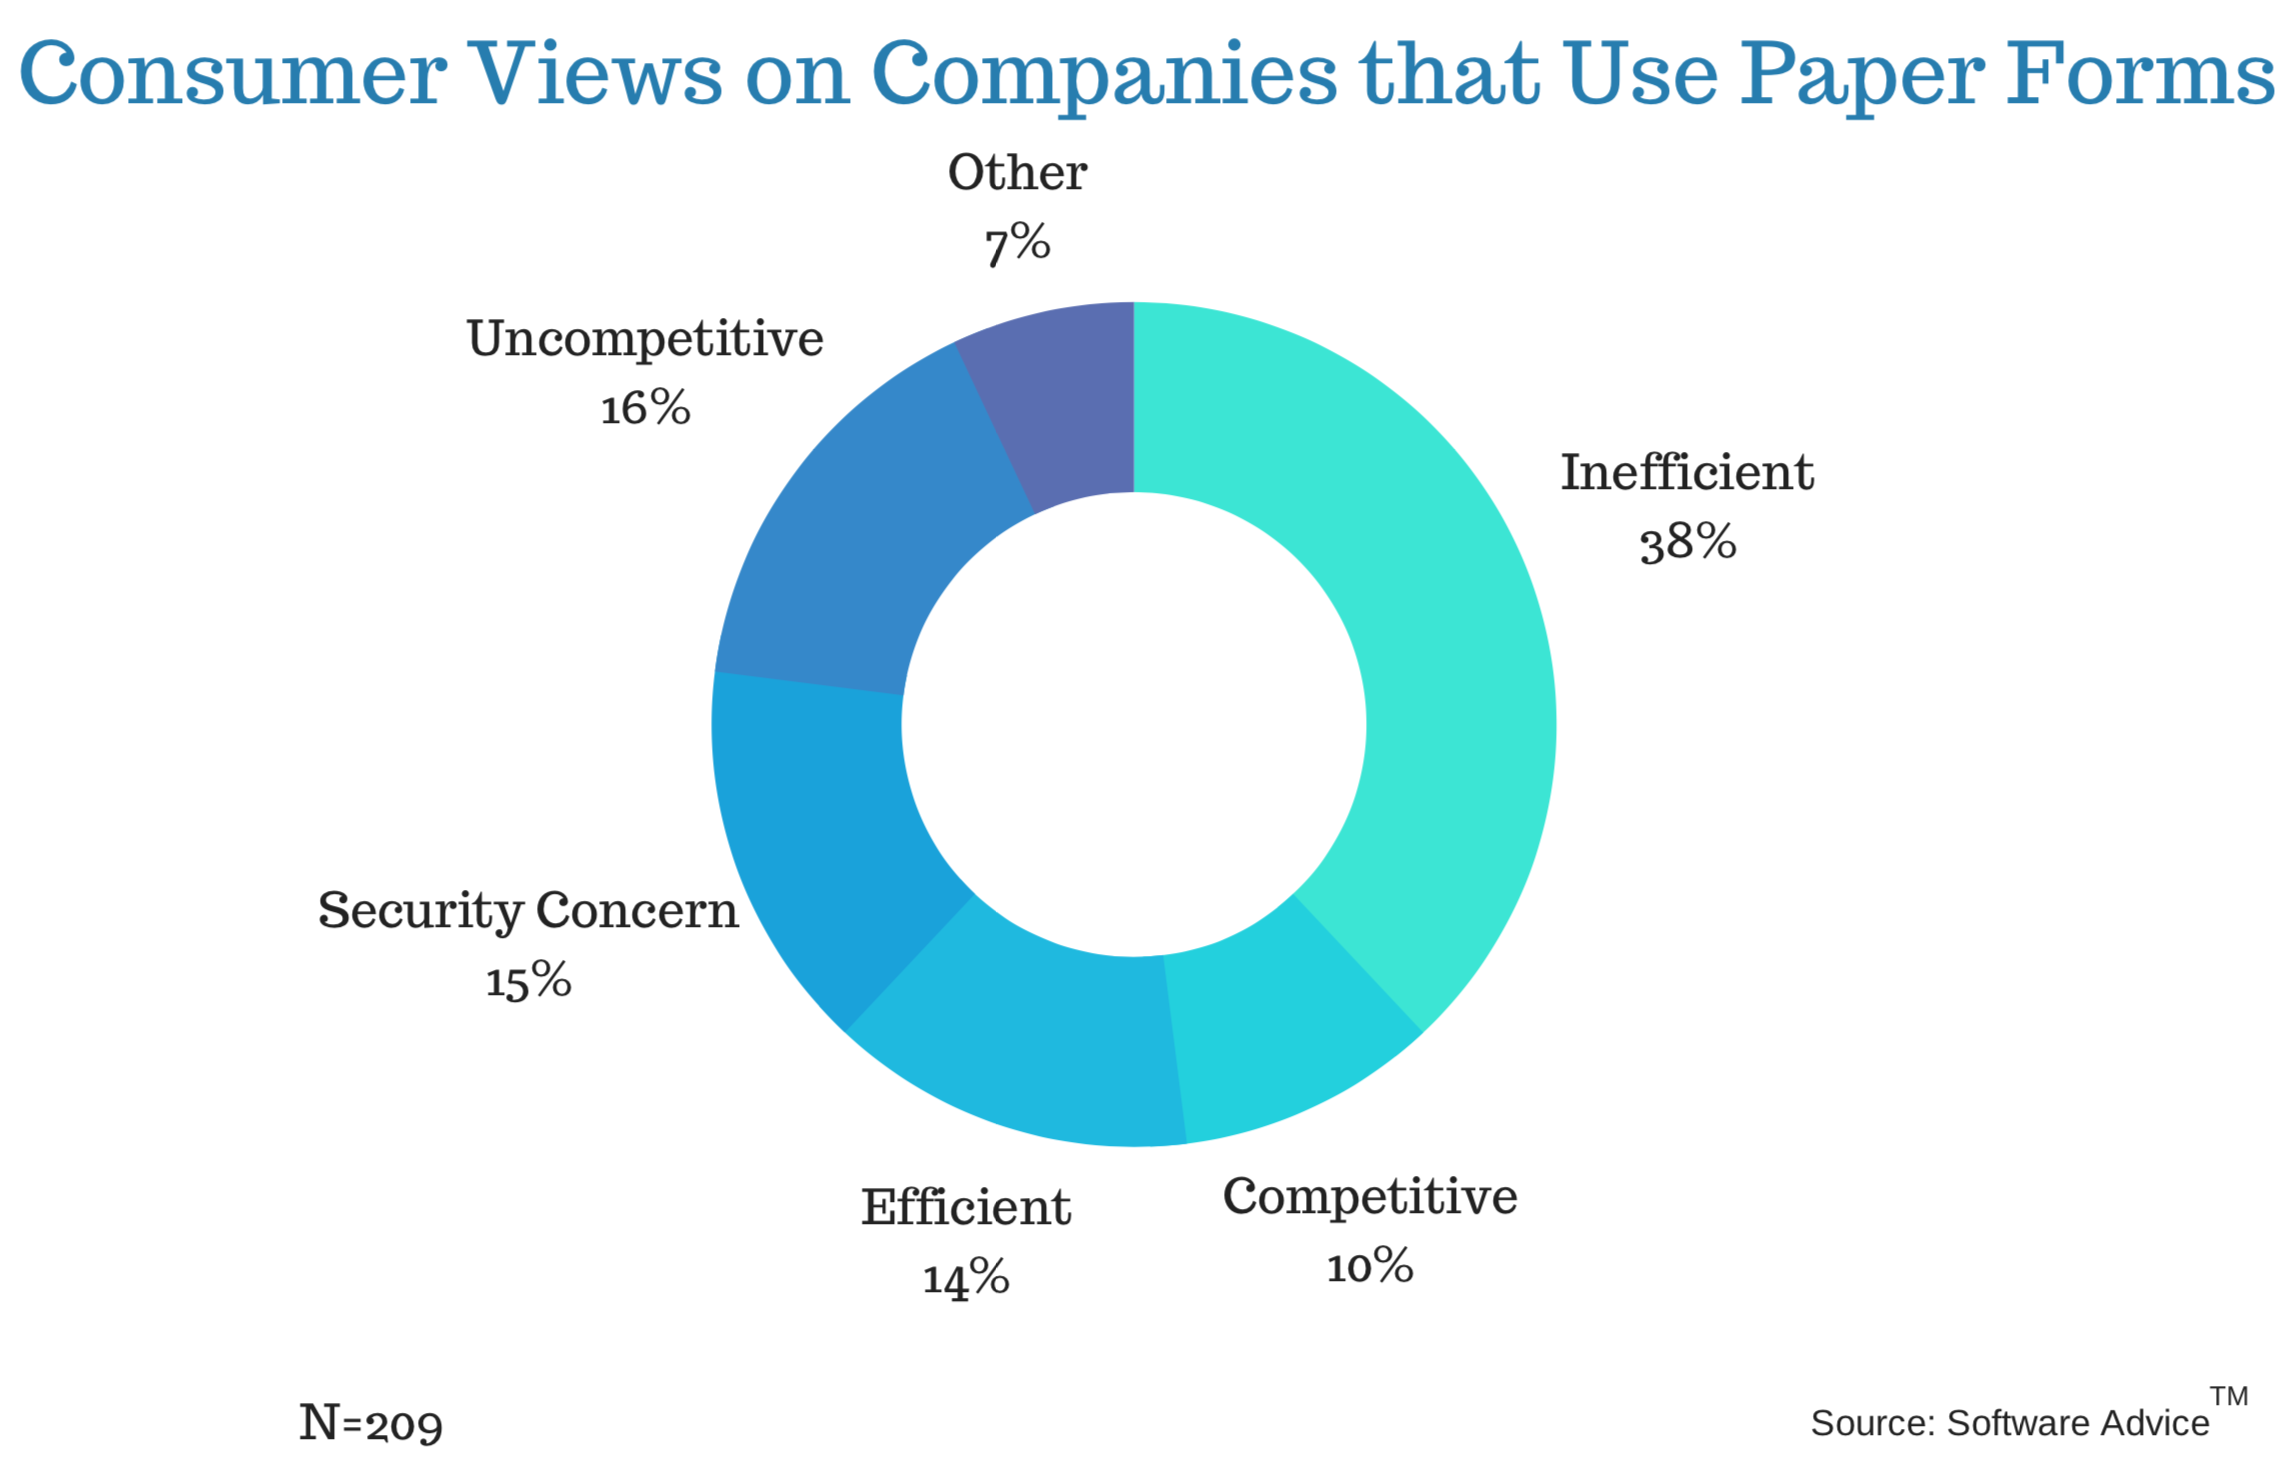 38% Consumers find companies using paper forms are inefficient.